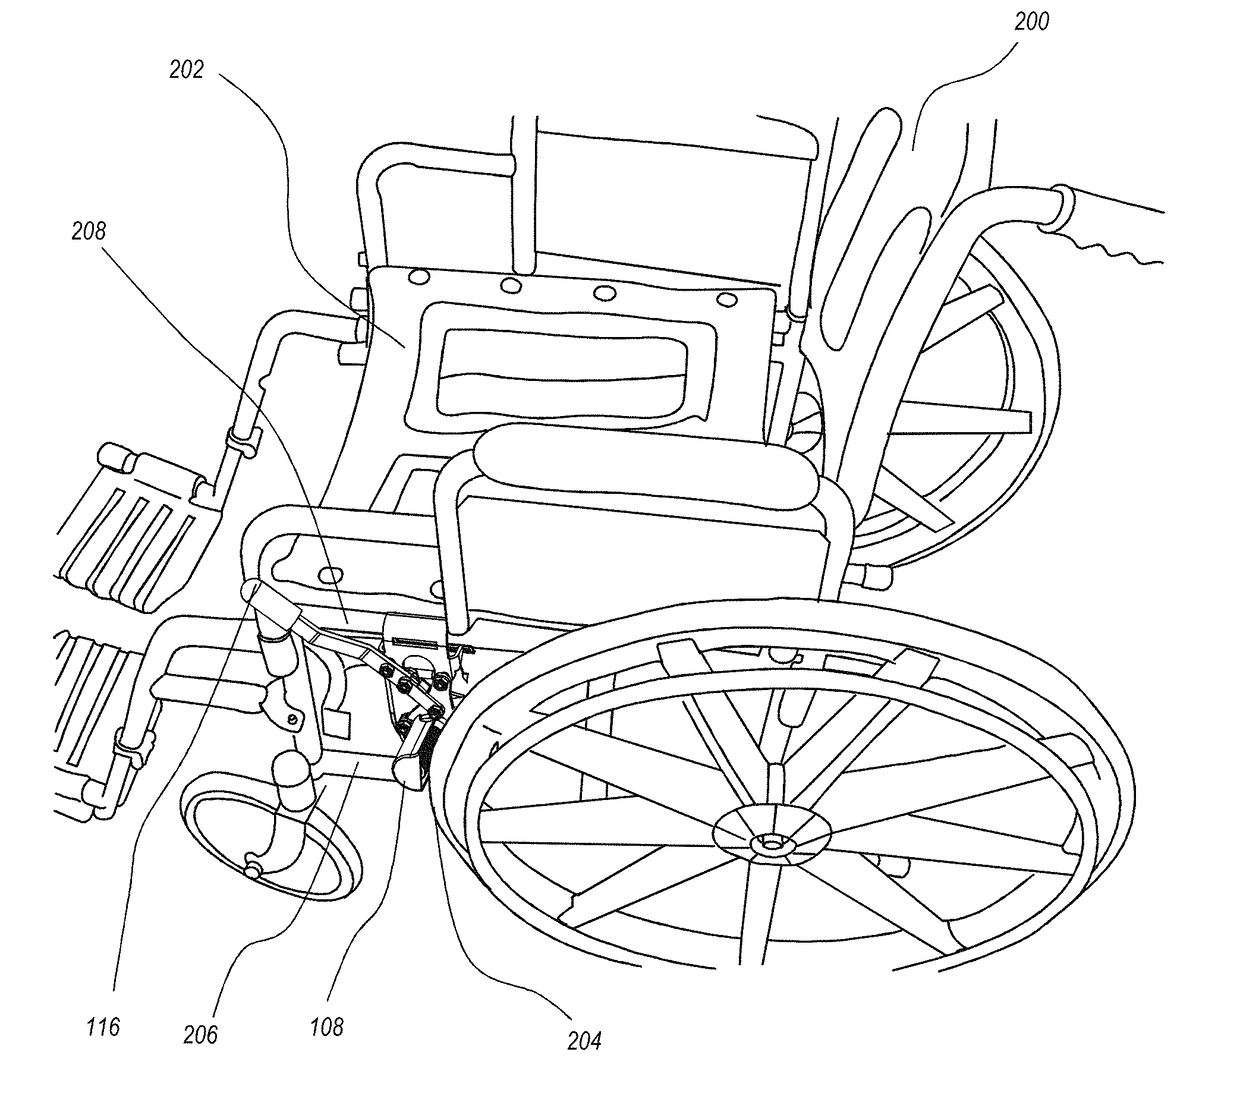 Powered wheelchair, wheelchair powering device and method